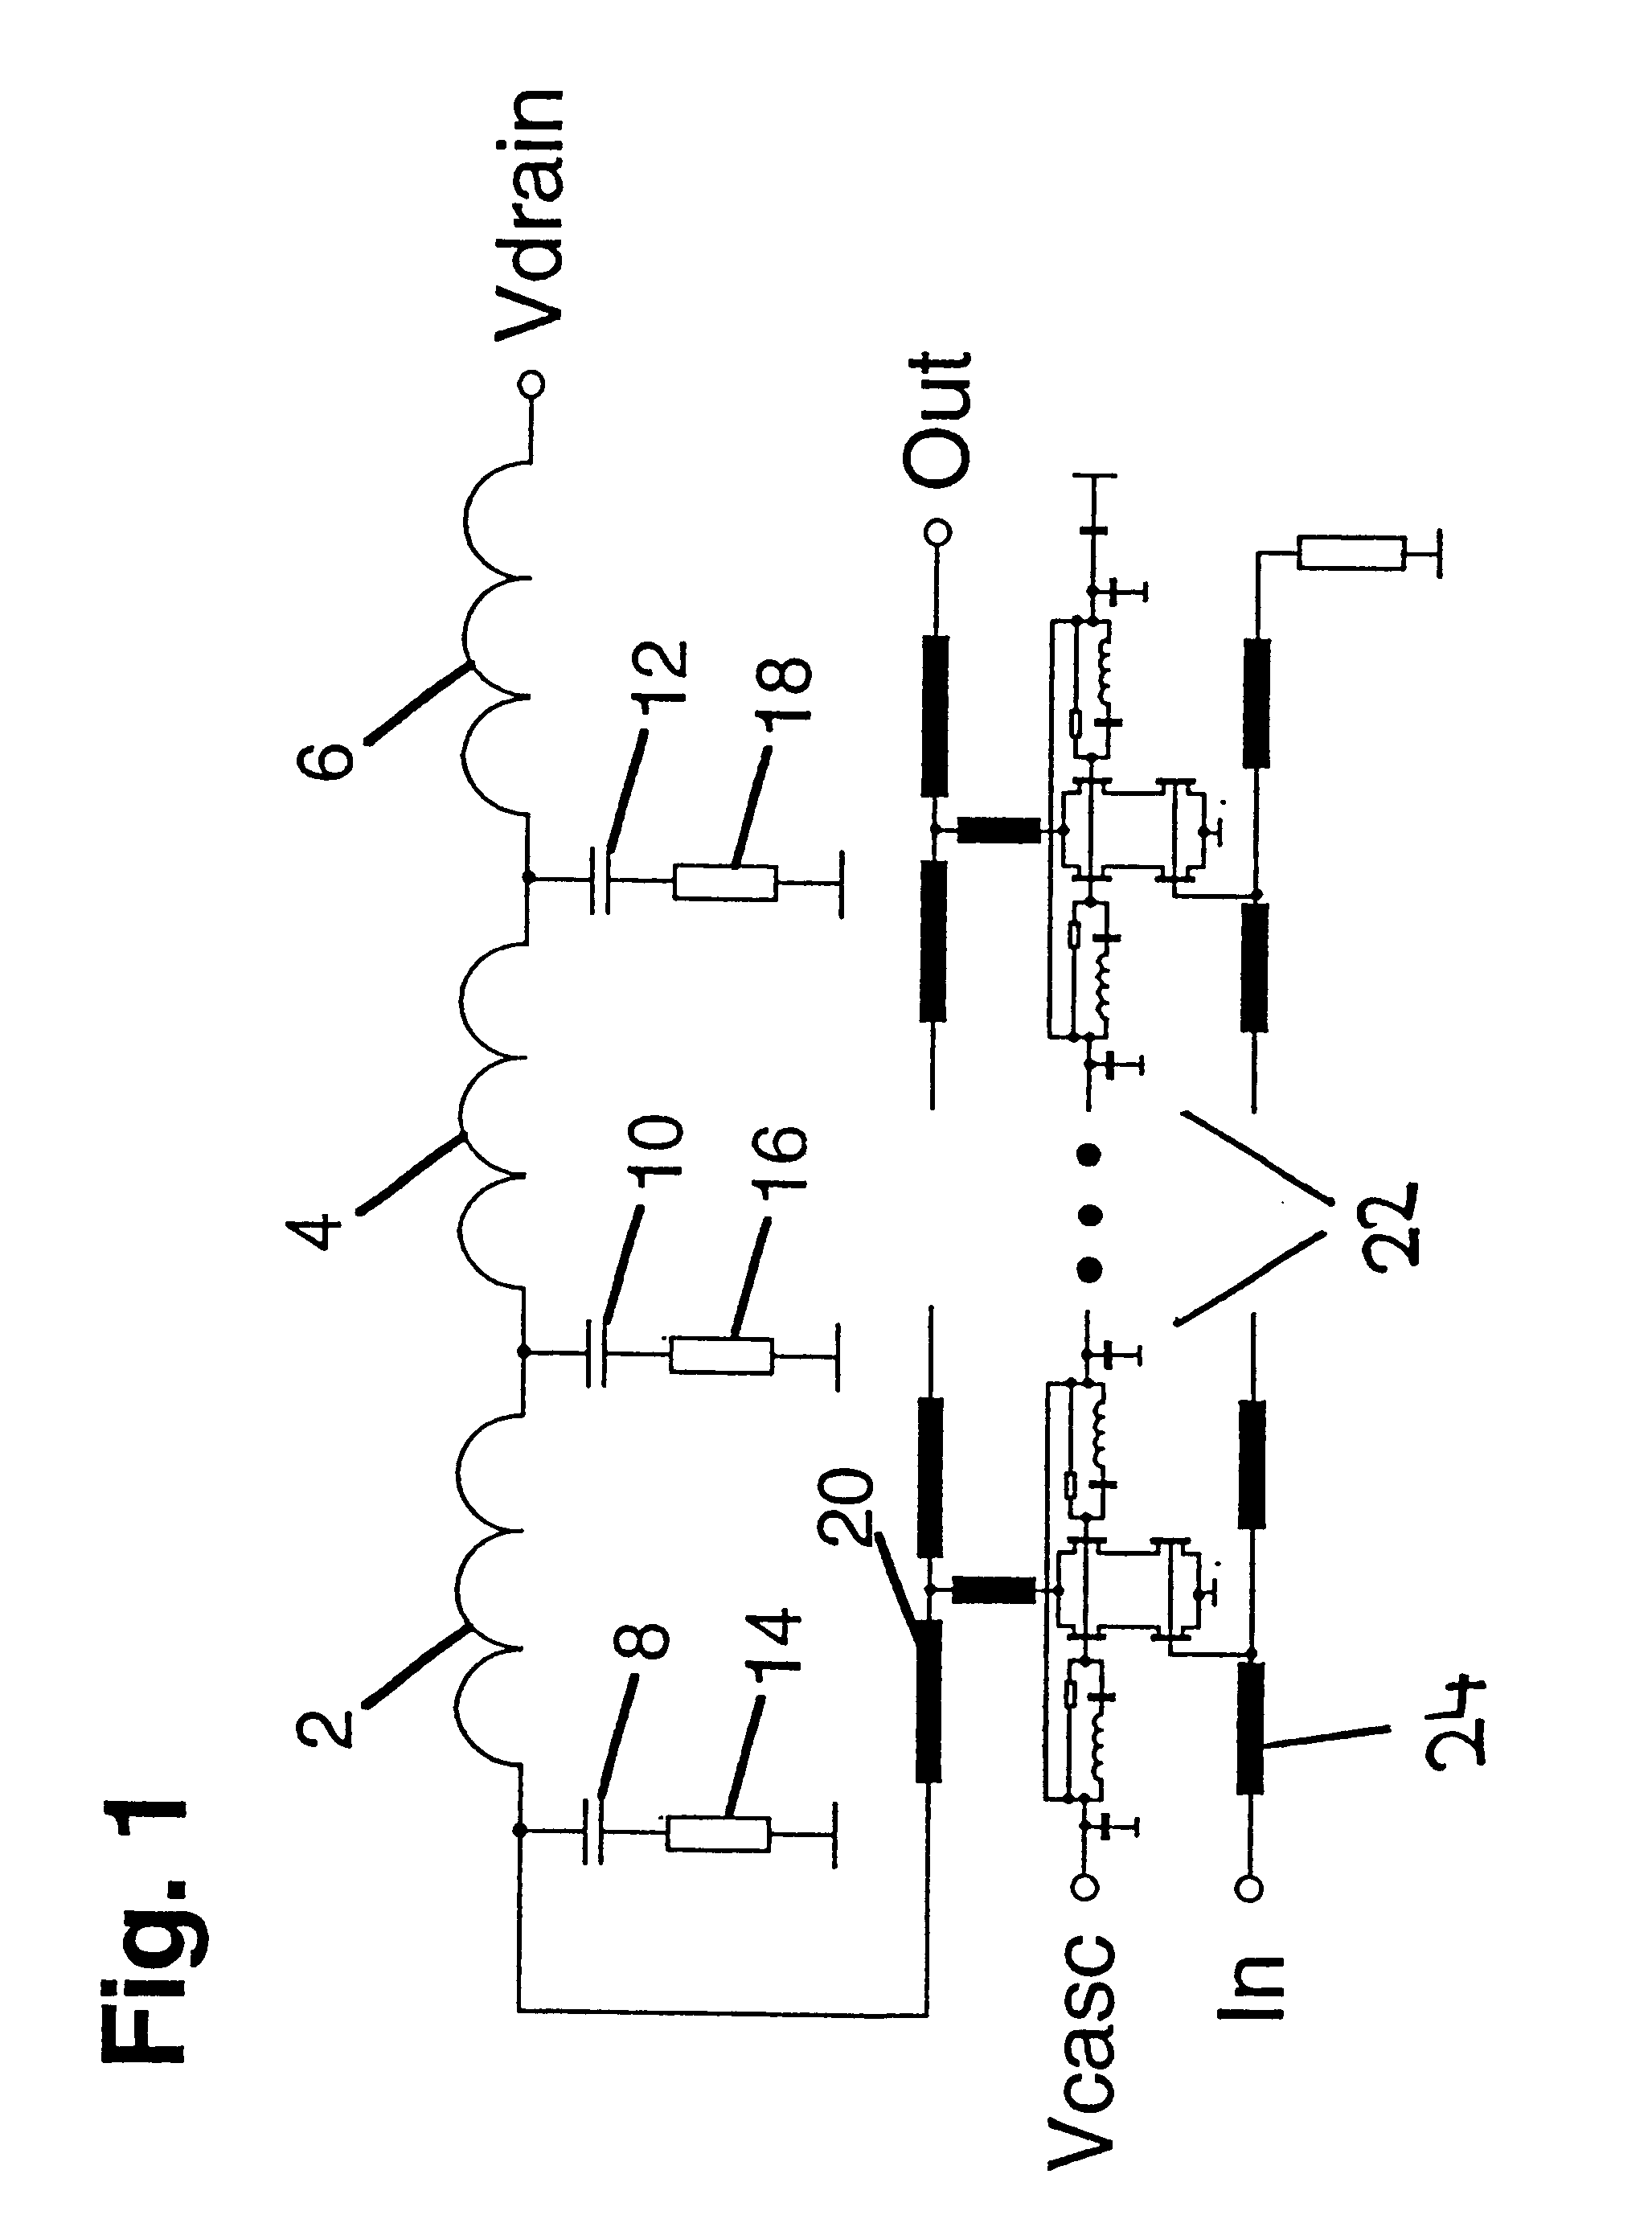 Supply voltage decoupling device for HF amplifier circuits